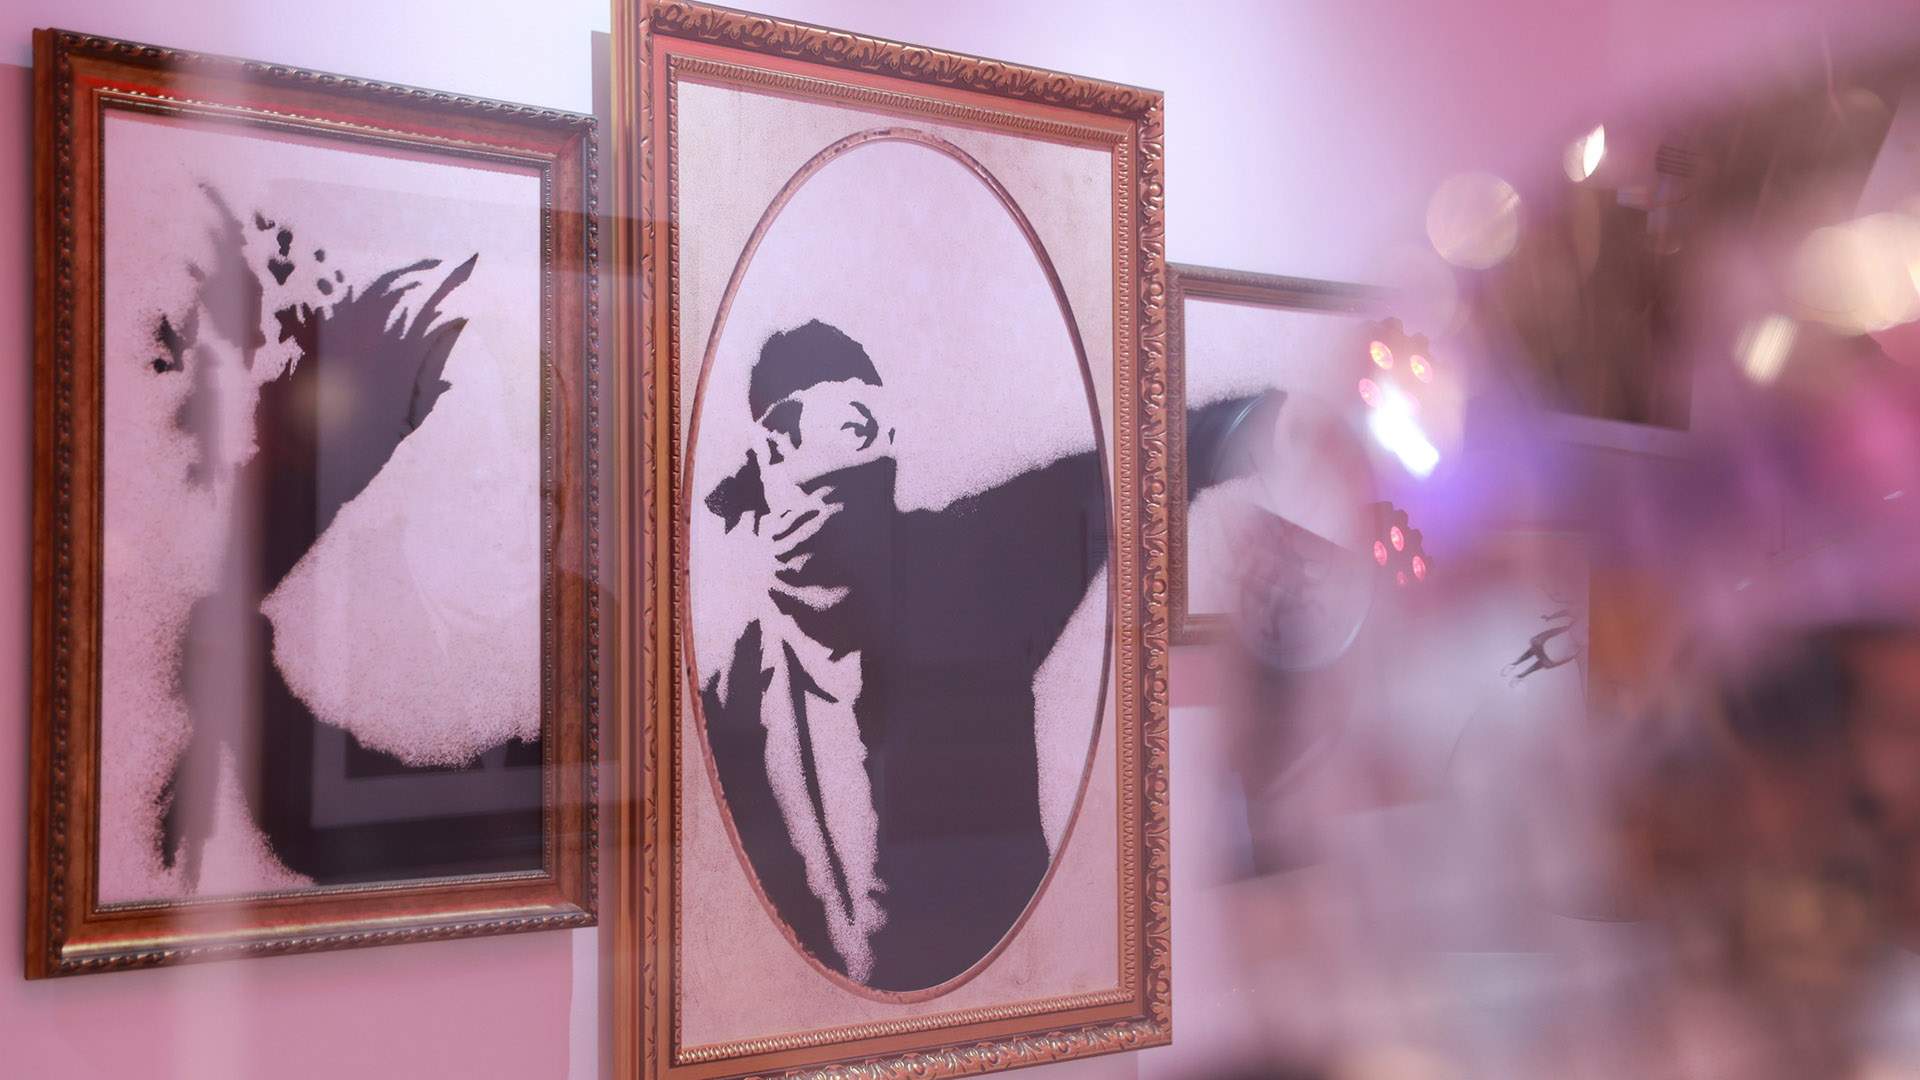 A Big Banksy Exhibition Featuring More Than 150 Artworks Is Coming to Brisbane This Autumn